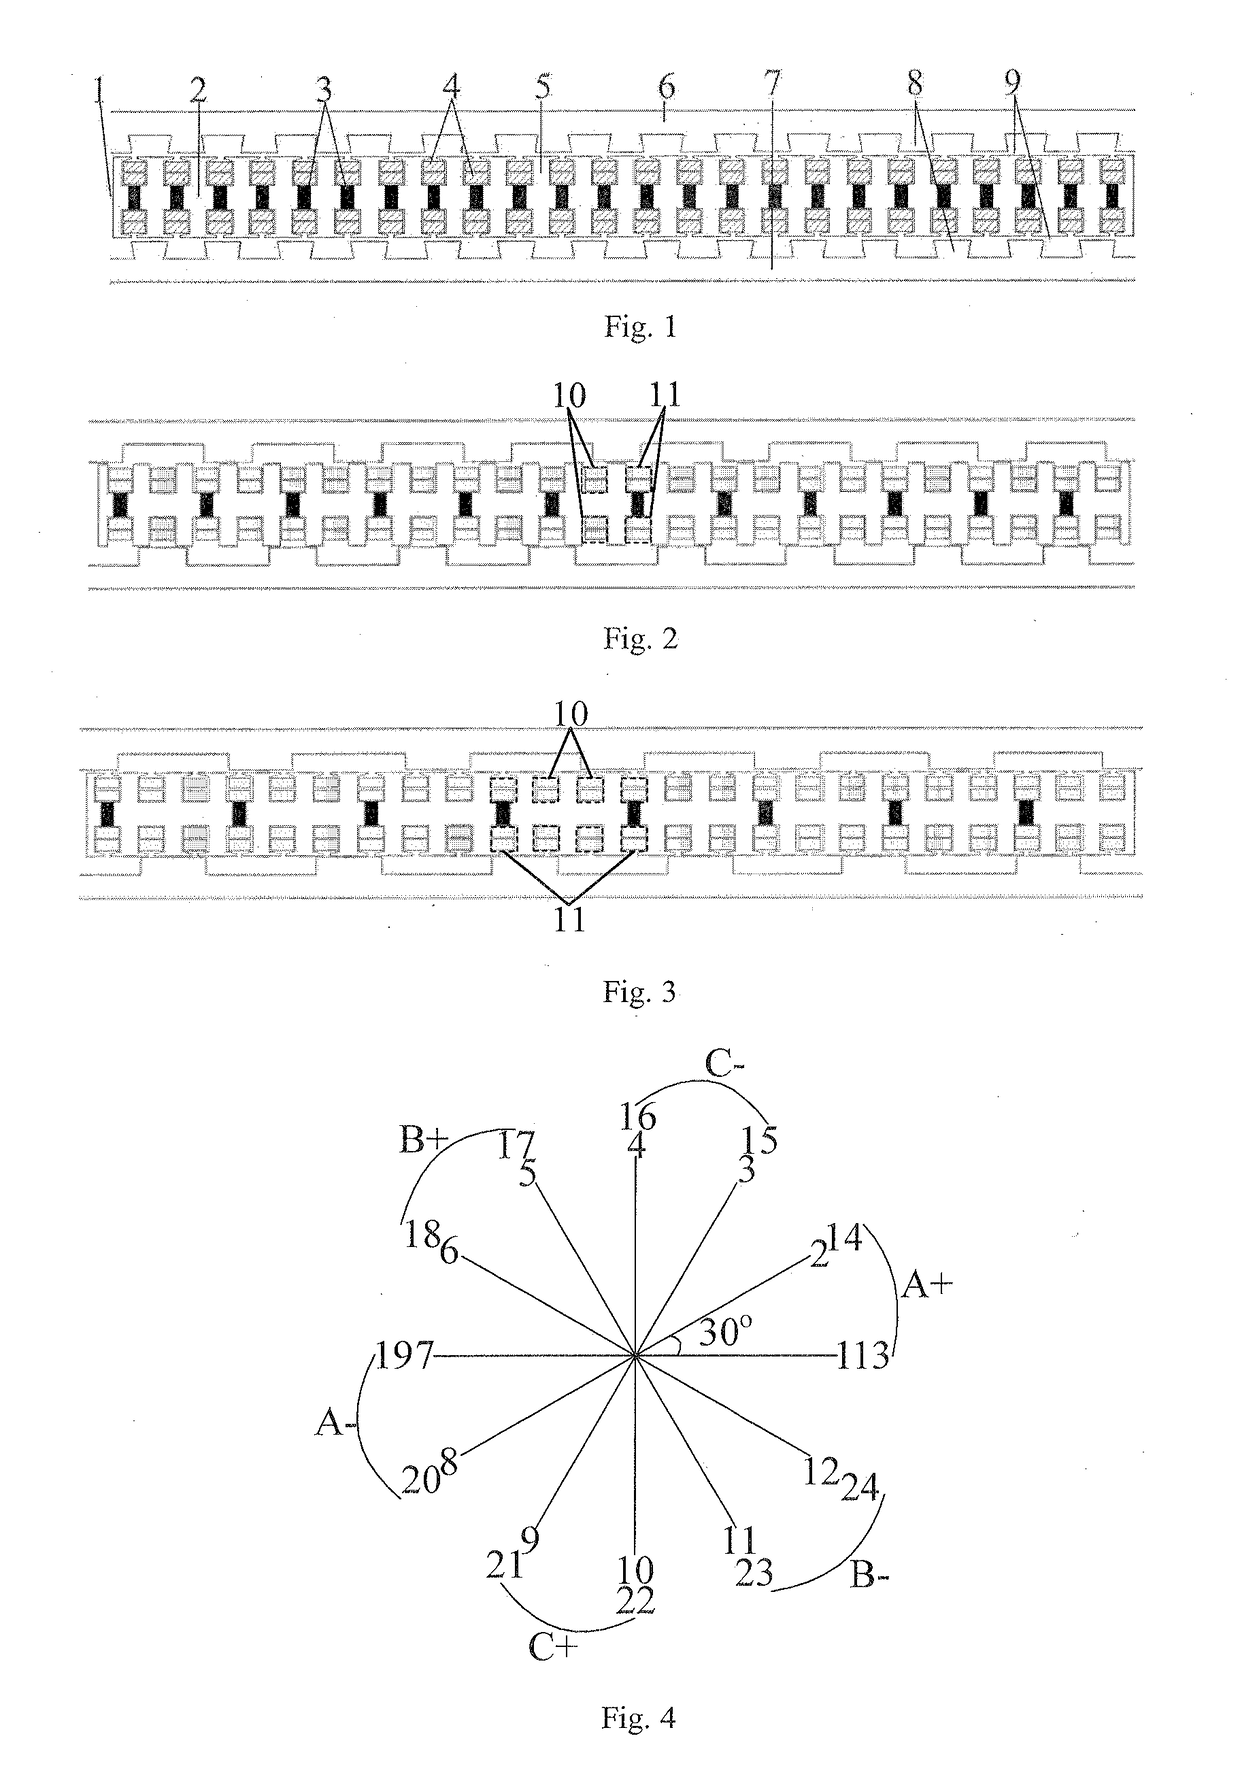 Double stator permanent magnet cursor linear motor and design method for increasing magnetic field modulation effect